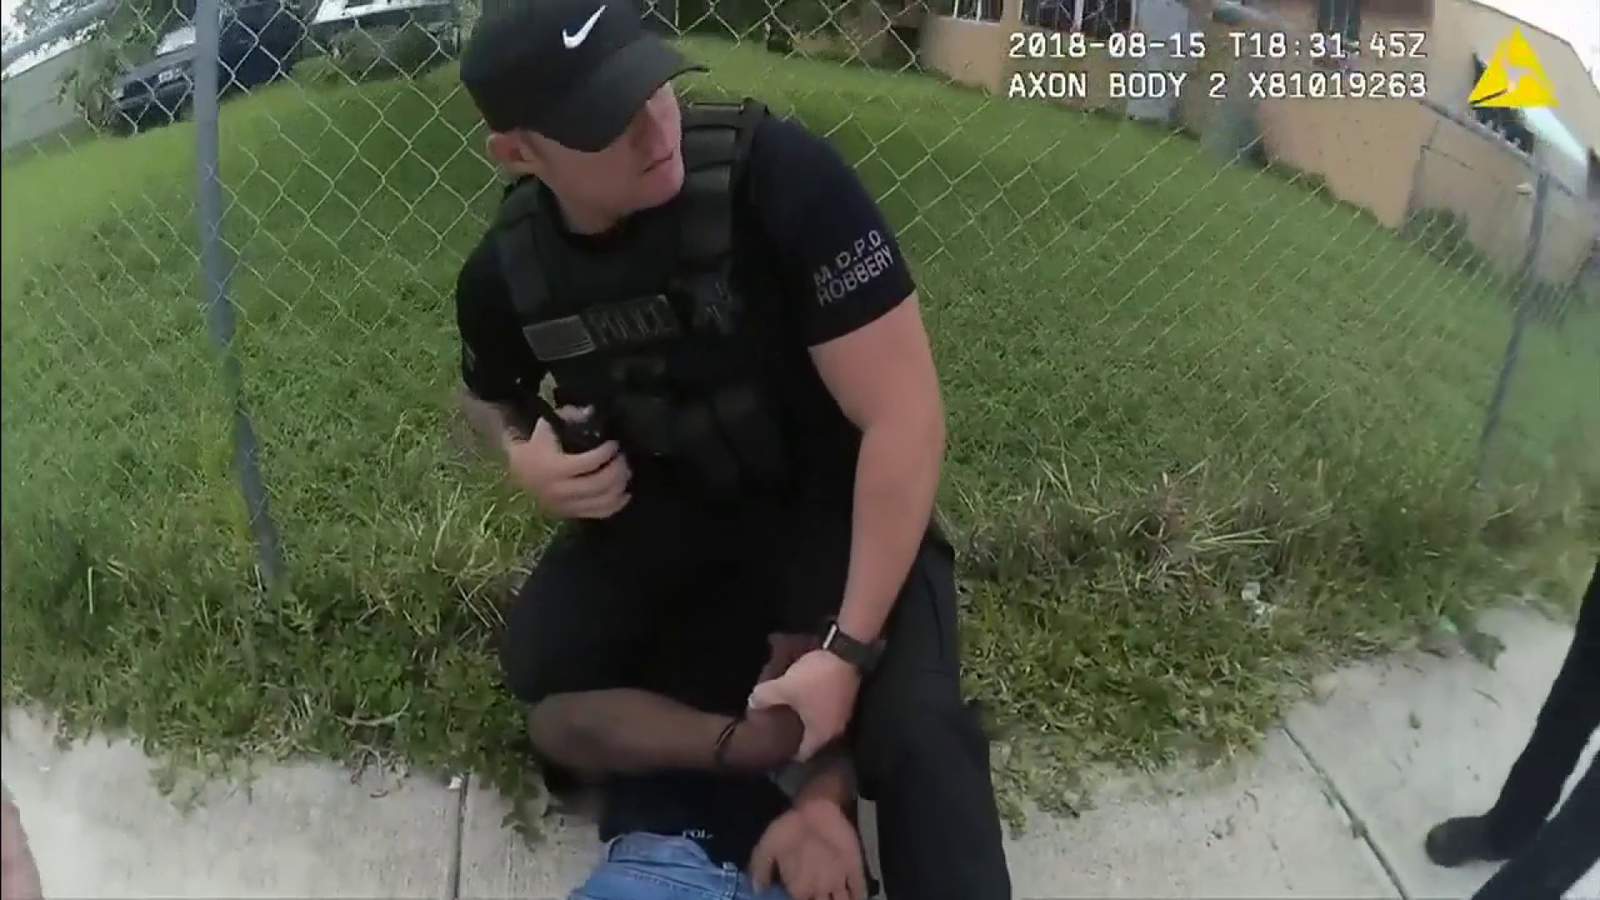 Officers actions caught on video in 2018 continue to be scrutinized